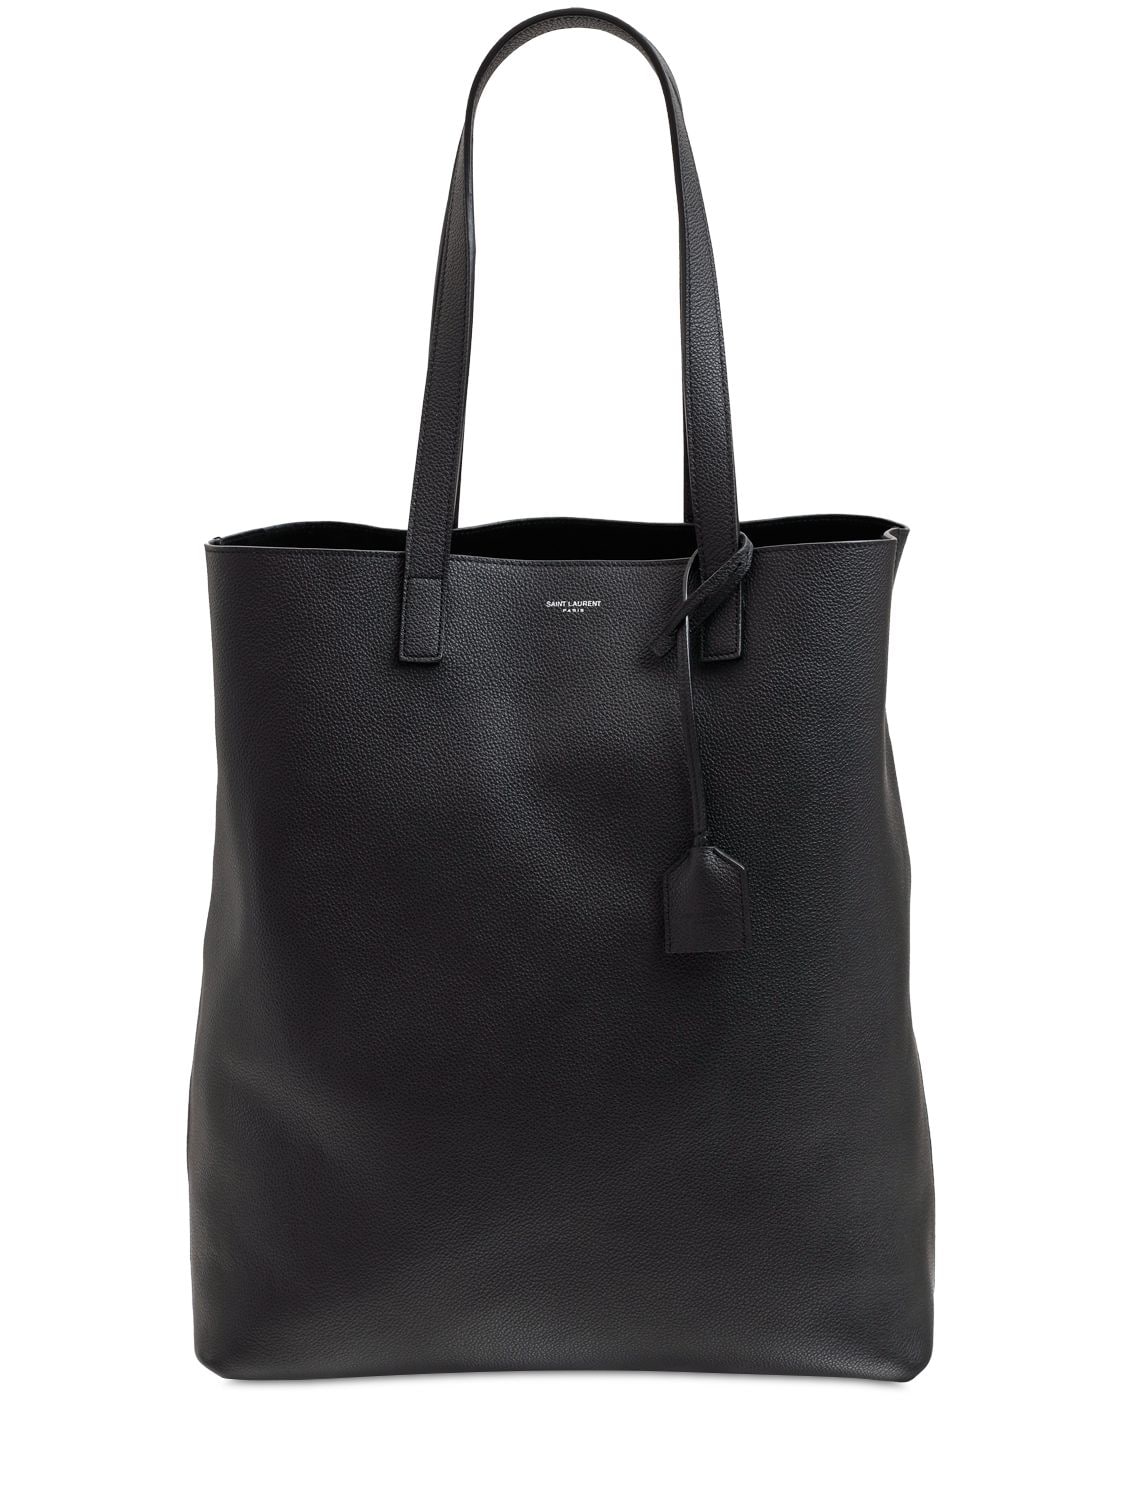 Ysl Bold Shopping Tote